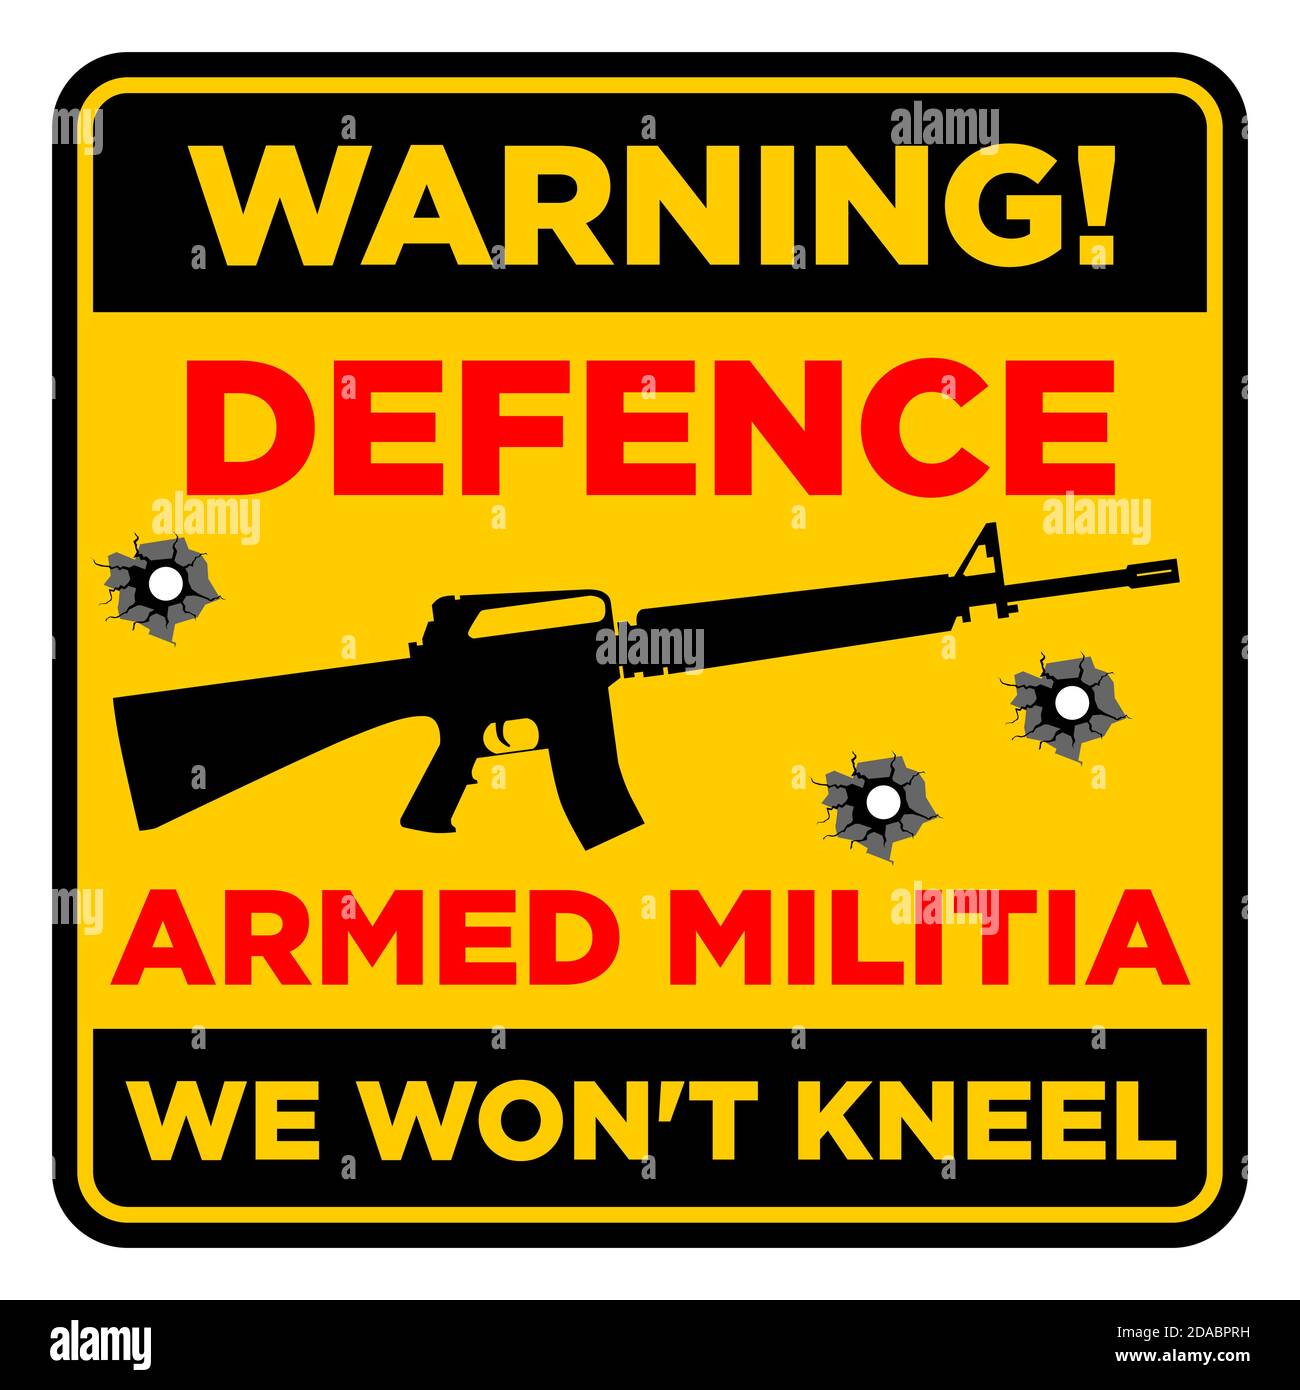 Warning sign defence armed militia. We won't kneel against crowd of looters. Illustration, vector Stock Vector